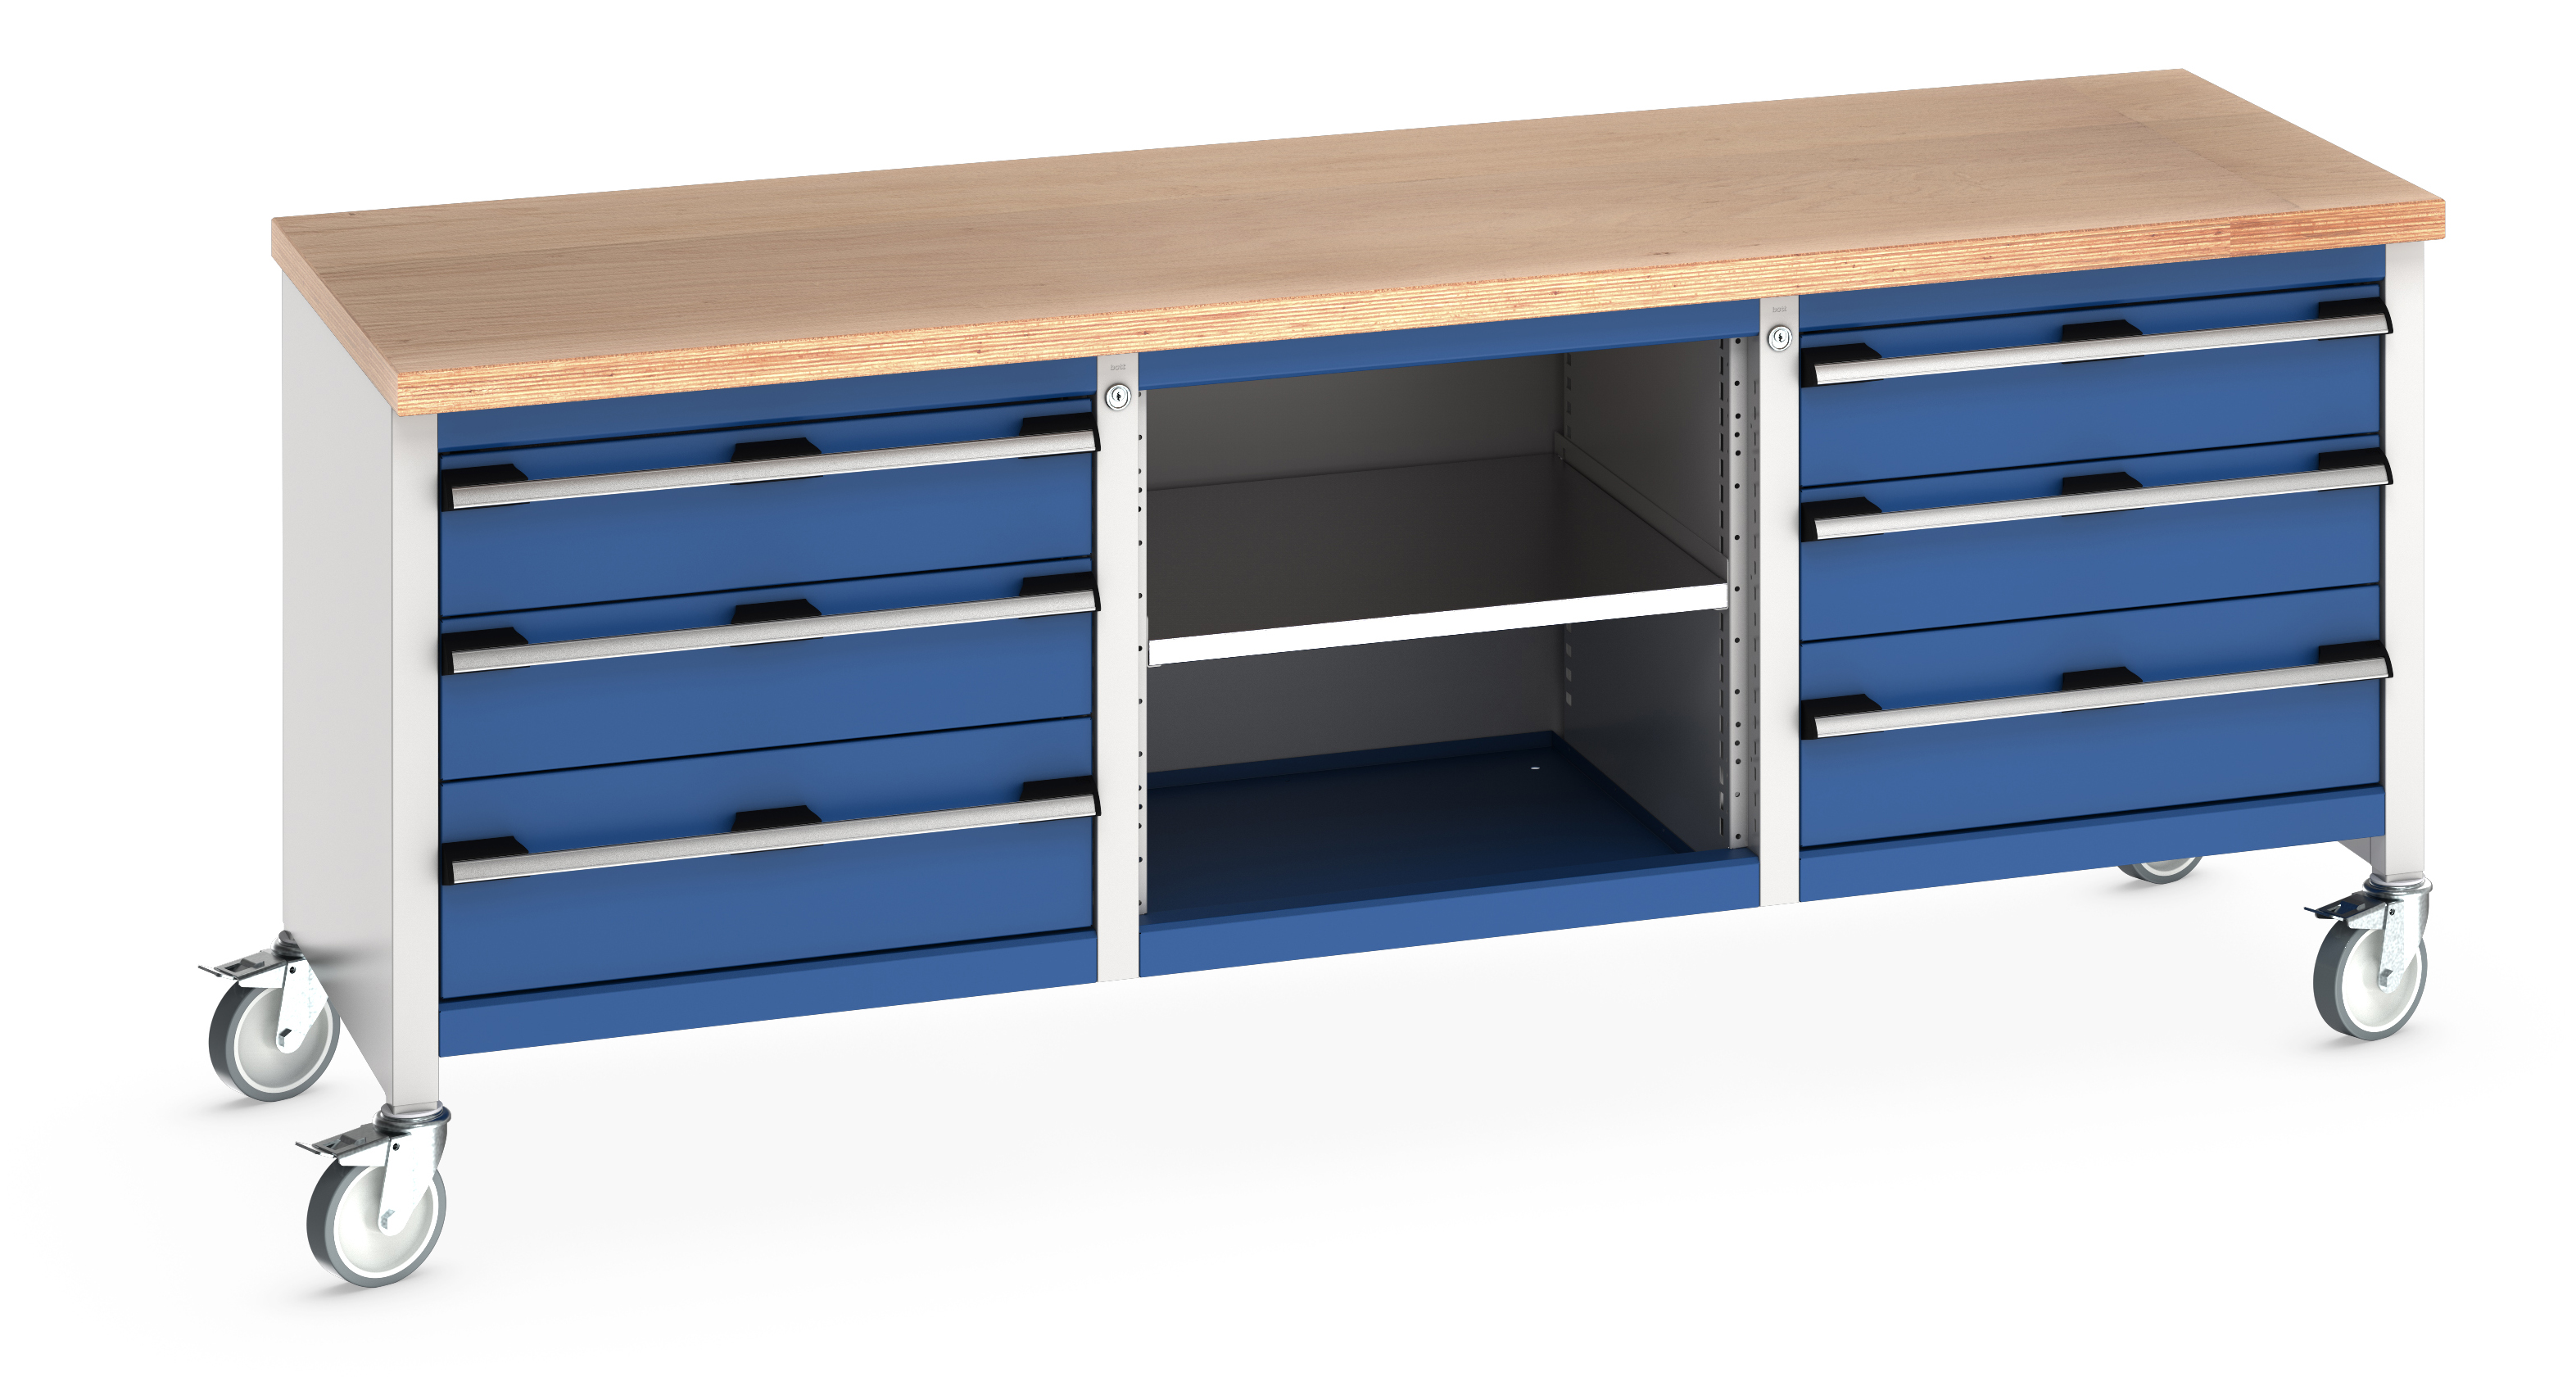 Bott Cubio Mobile Storage Bench With 3 Drawer Cabinet / Open Cupboard / 3 Drawer Cabinet - 41002130.11V